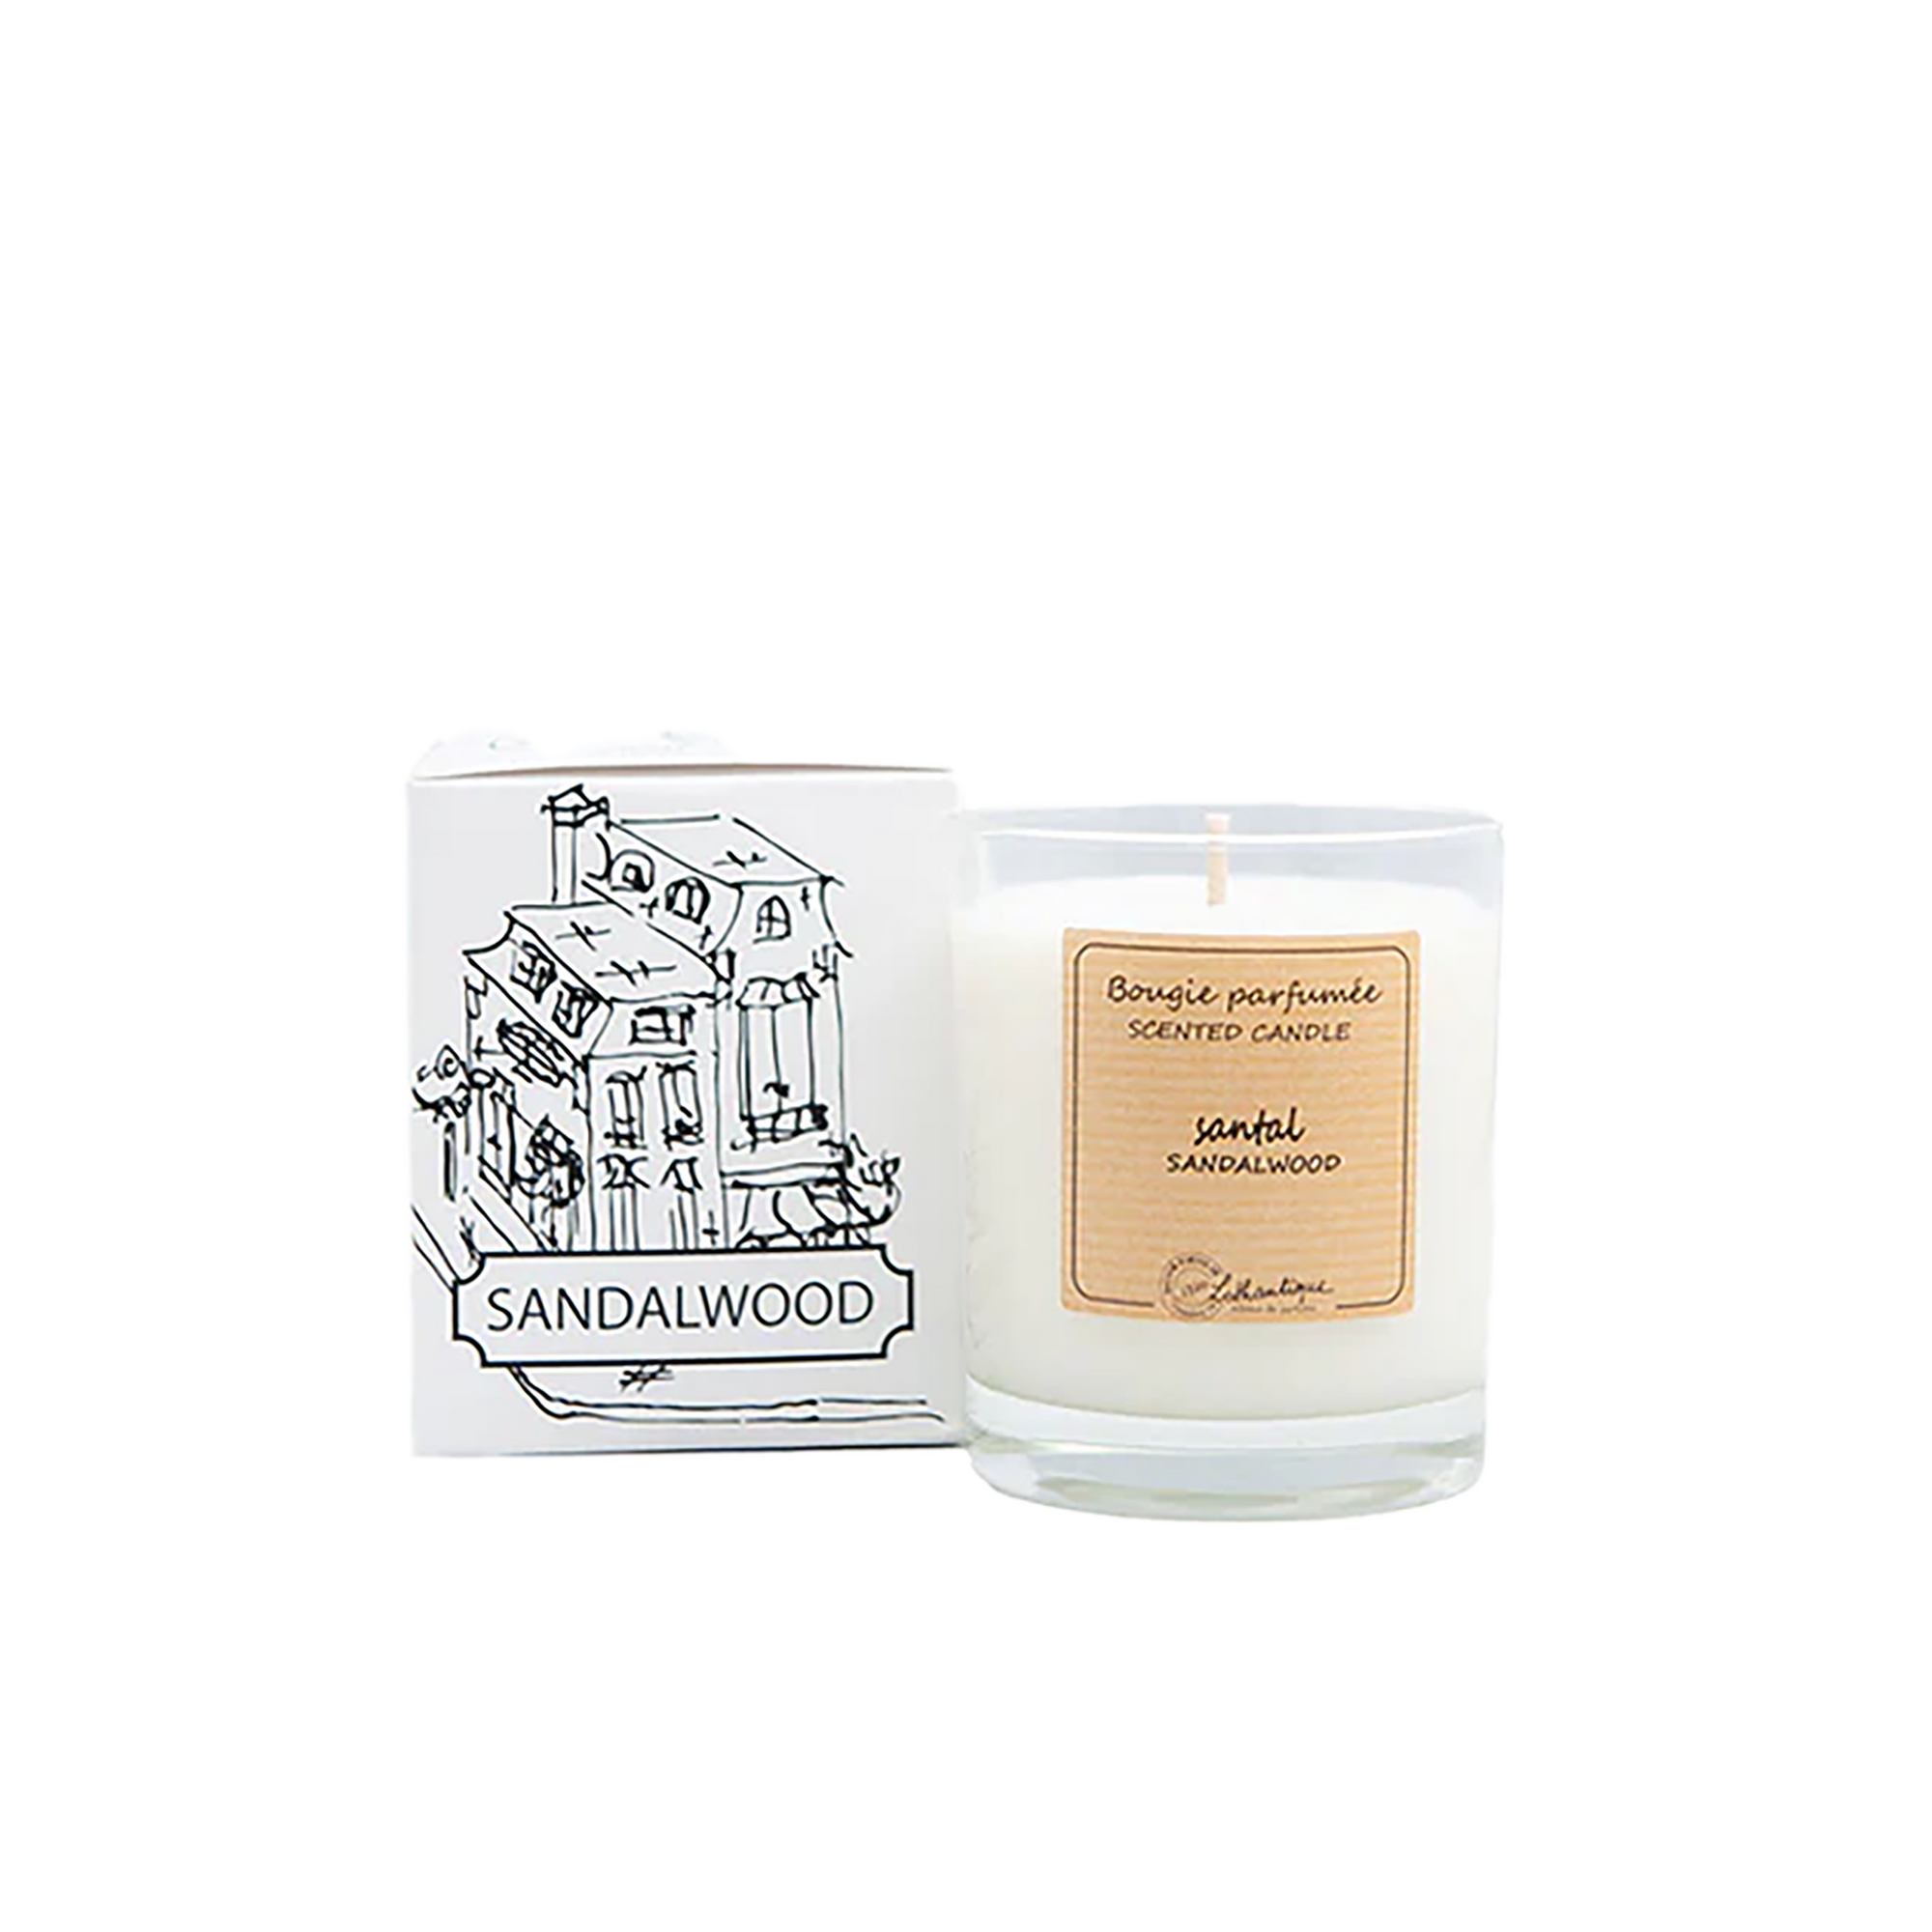 Fragrance your home with these delicately scented candles.